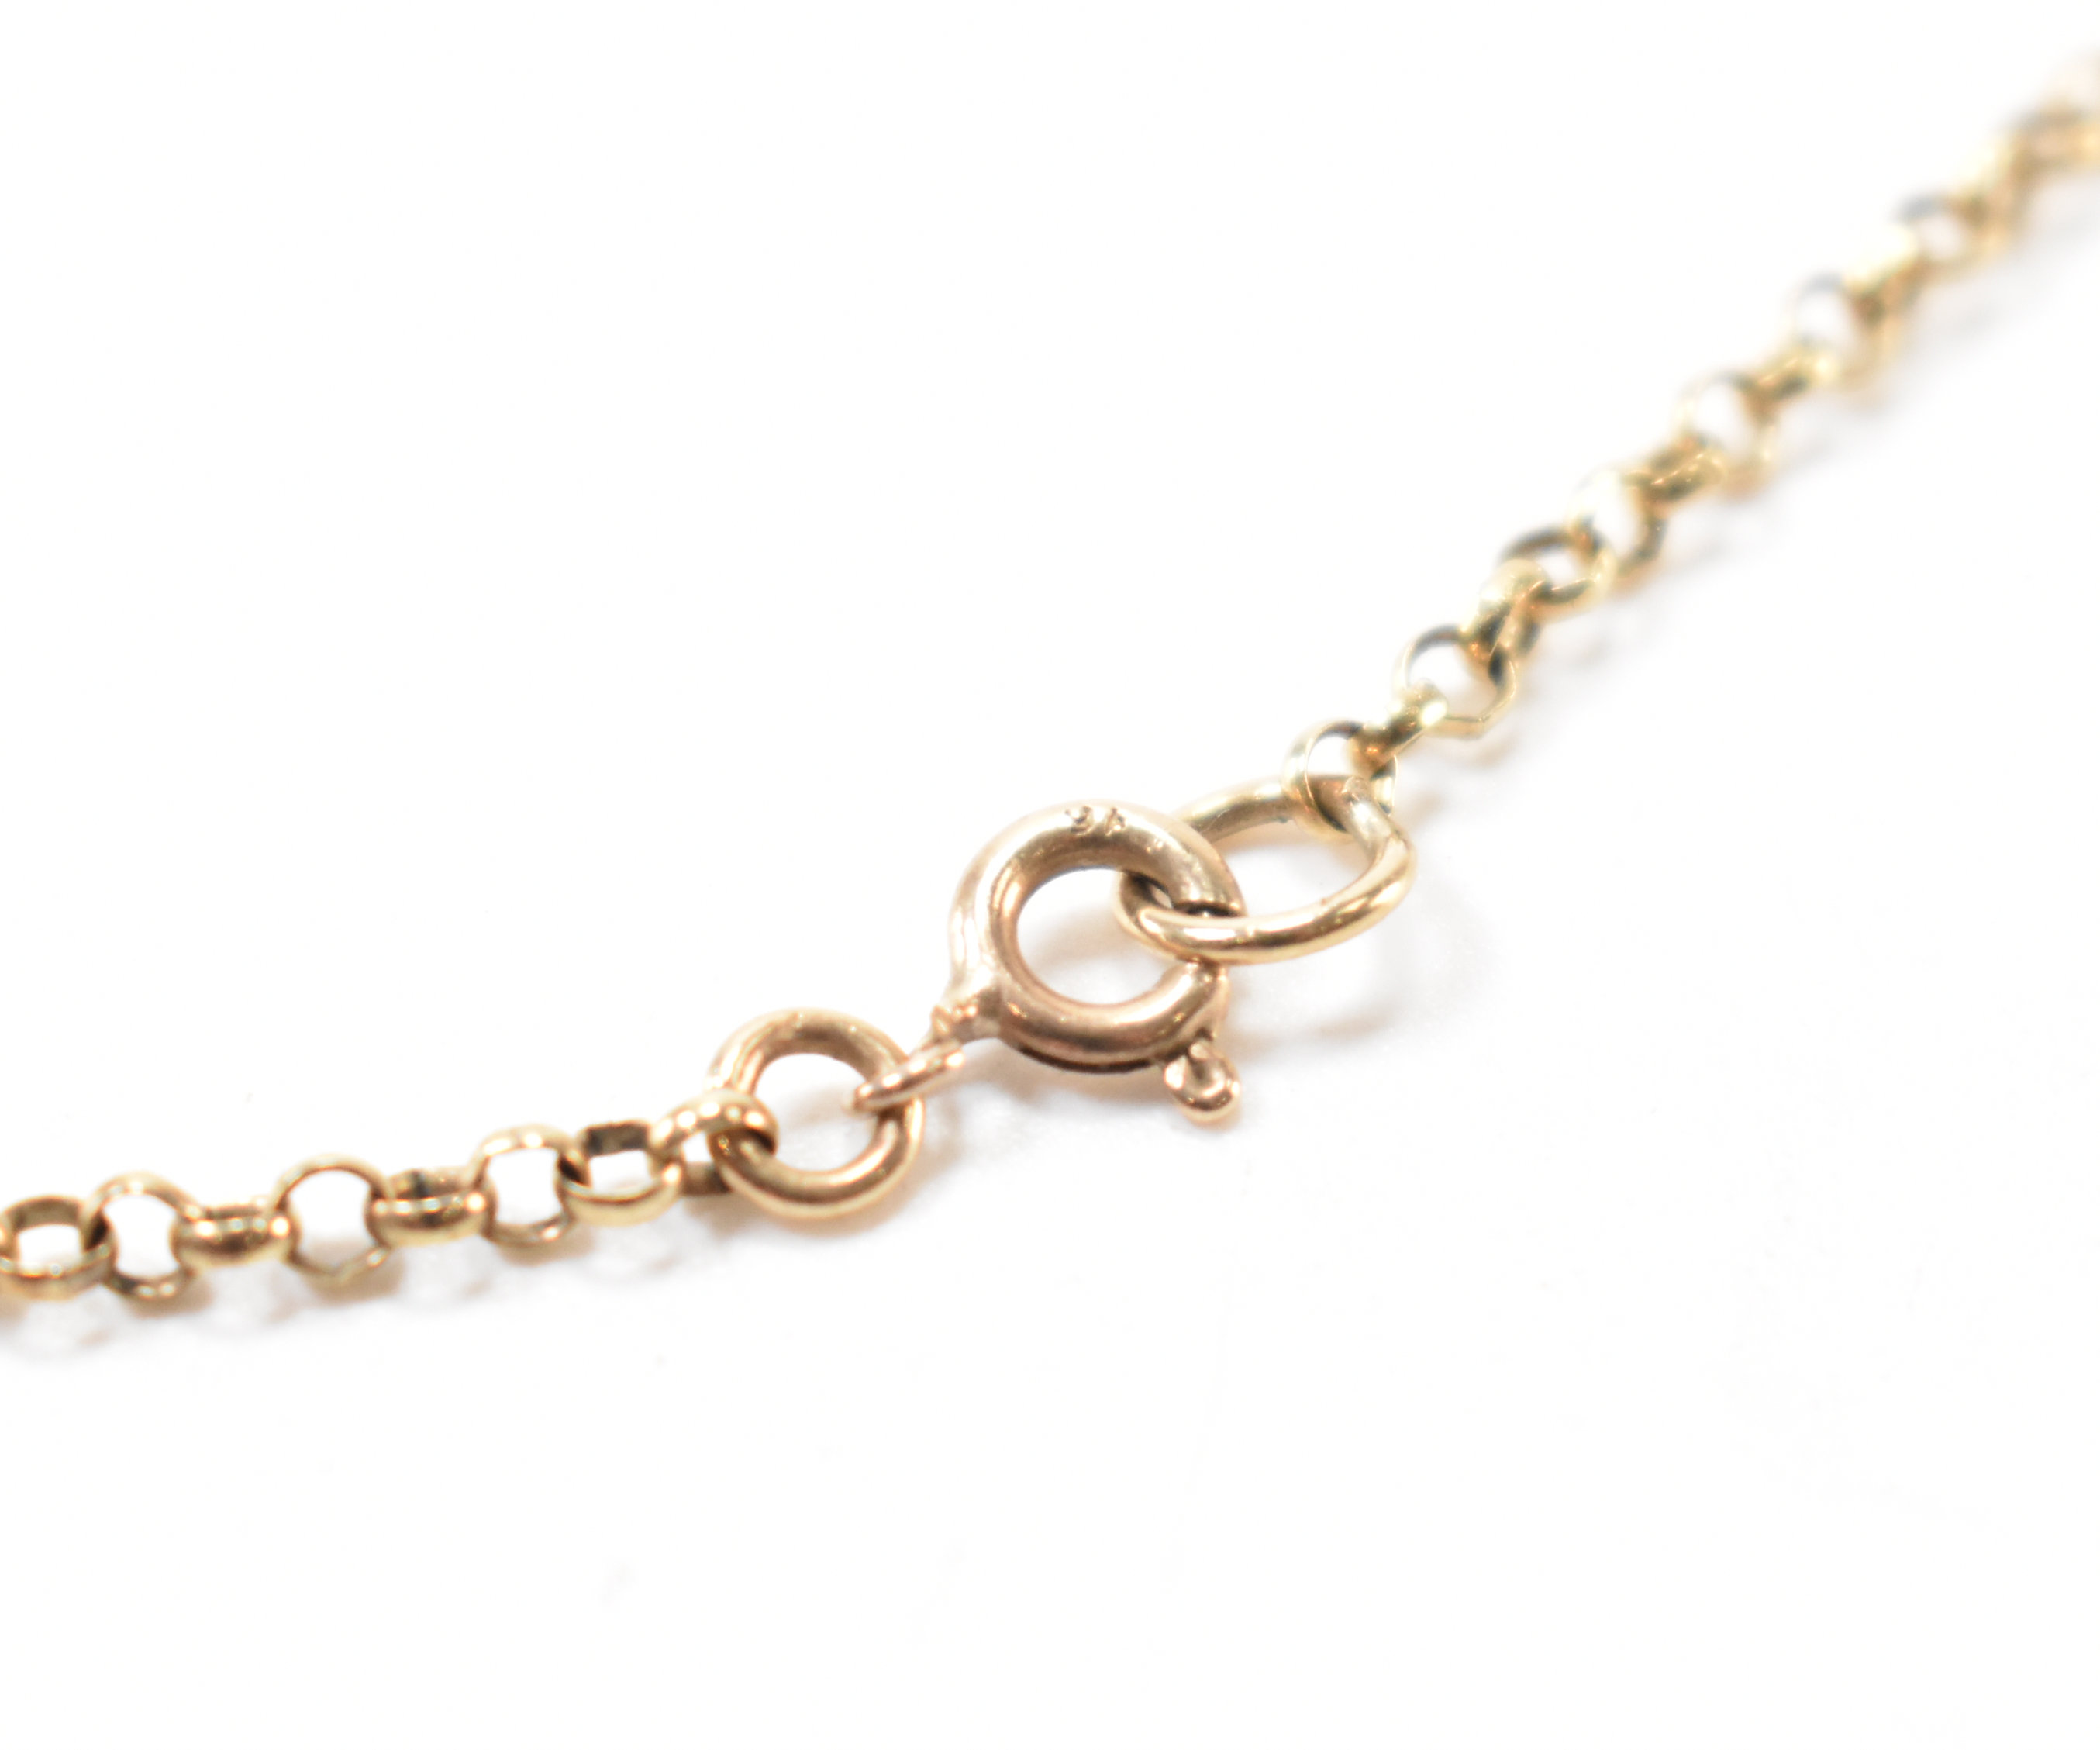 VINTAGE GOLD NECKLACE CHAIN - Image 4 of 4